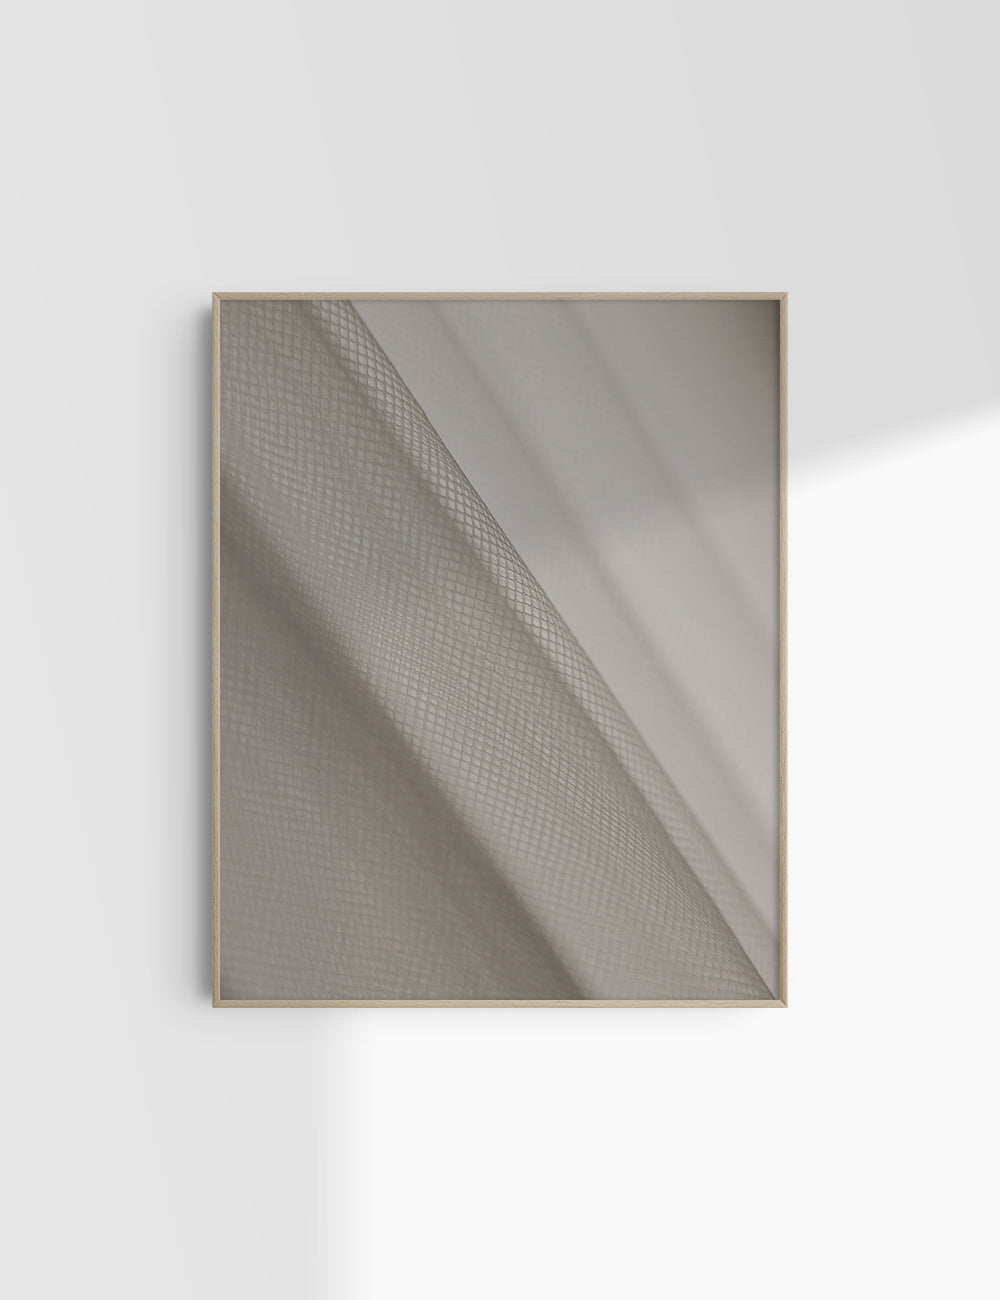 Abstract minimalist photography 1.4 Beige aesthetic. Printable wall art photography. PAPER MOON Art & Design